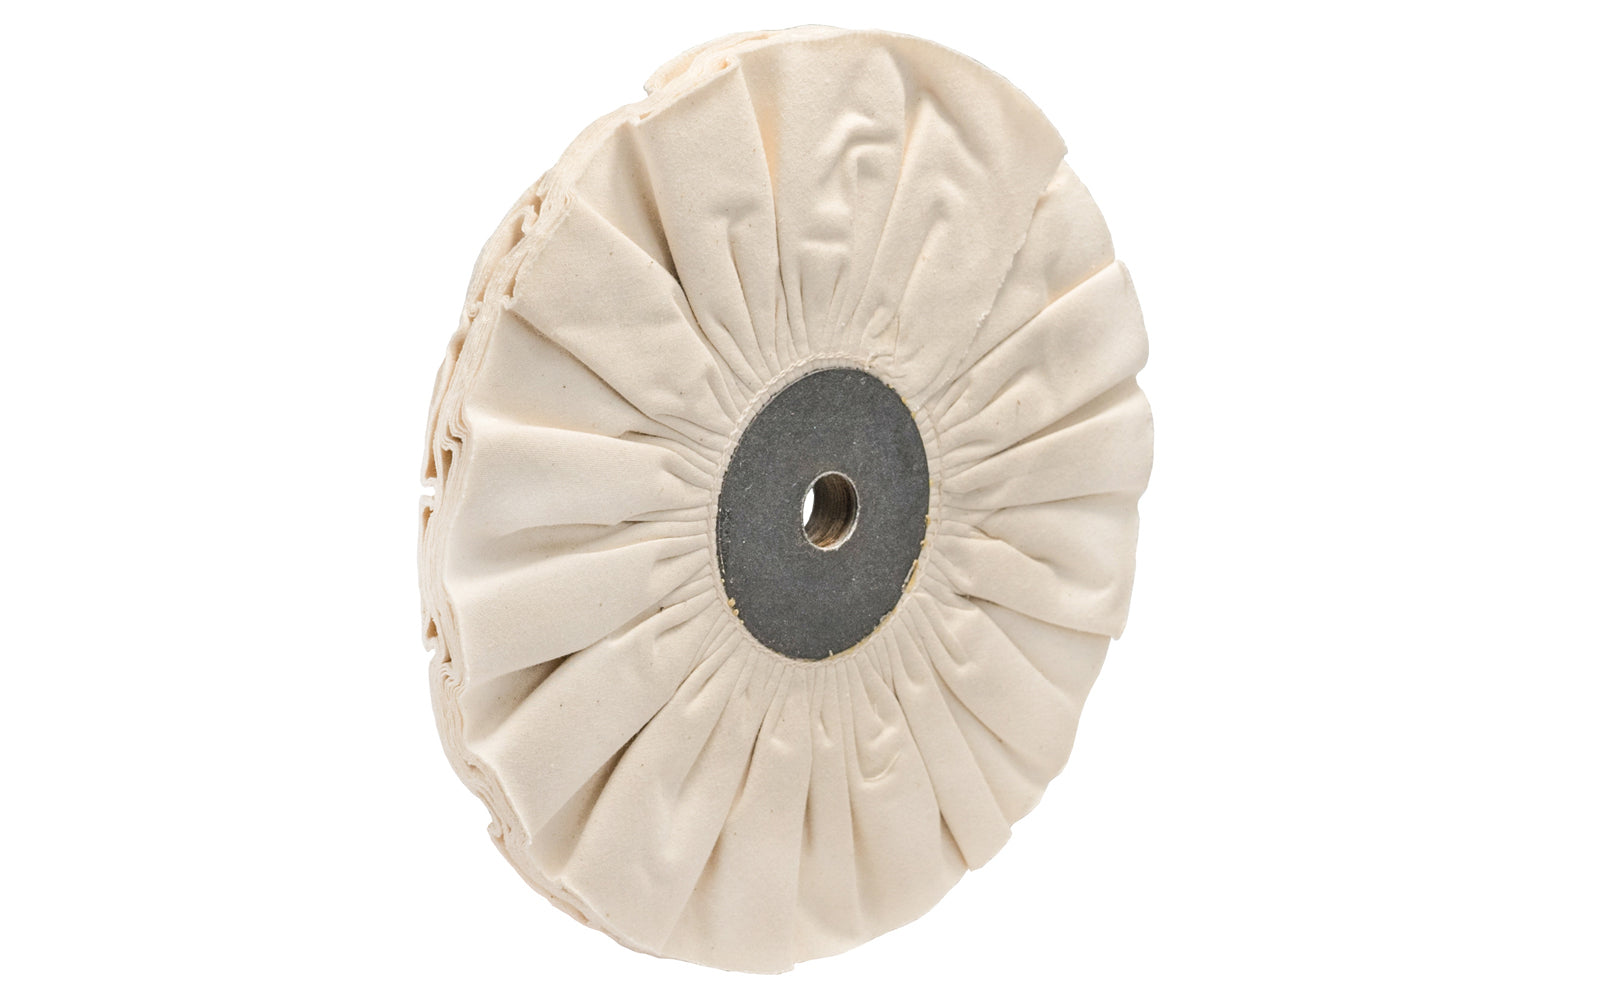 The 8" "Fray-Rite" Bias Cloth Buffing Wheel ~ 1/2" Thick has 5/8" hole diameter.  8" diameter of wheel. 1/2" wide thickness. Dico 528-166. Made in USA.